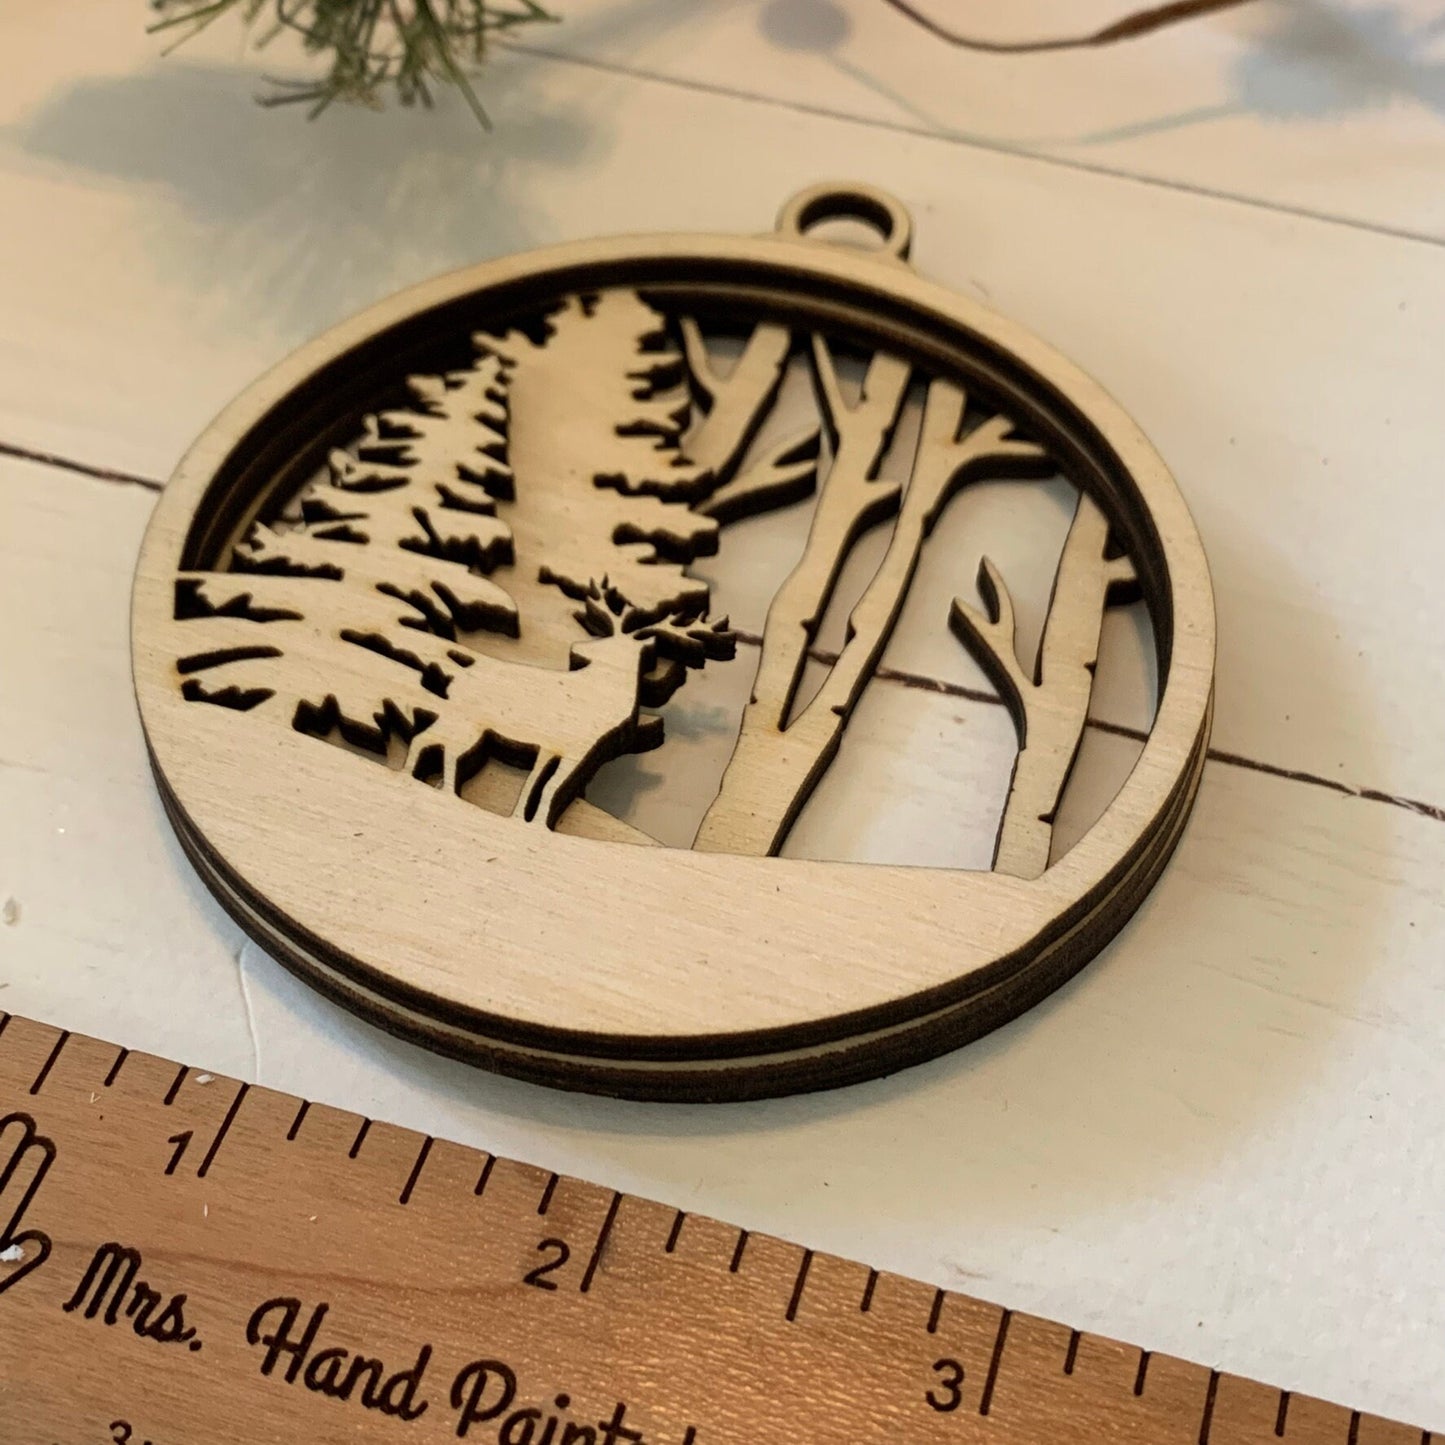 Laser Cut Wood Layered Ornament - Reindeer and Woodland Scene